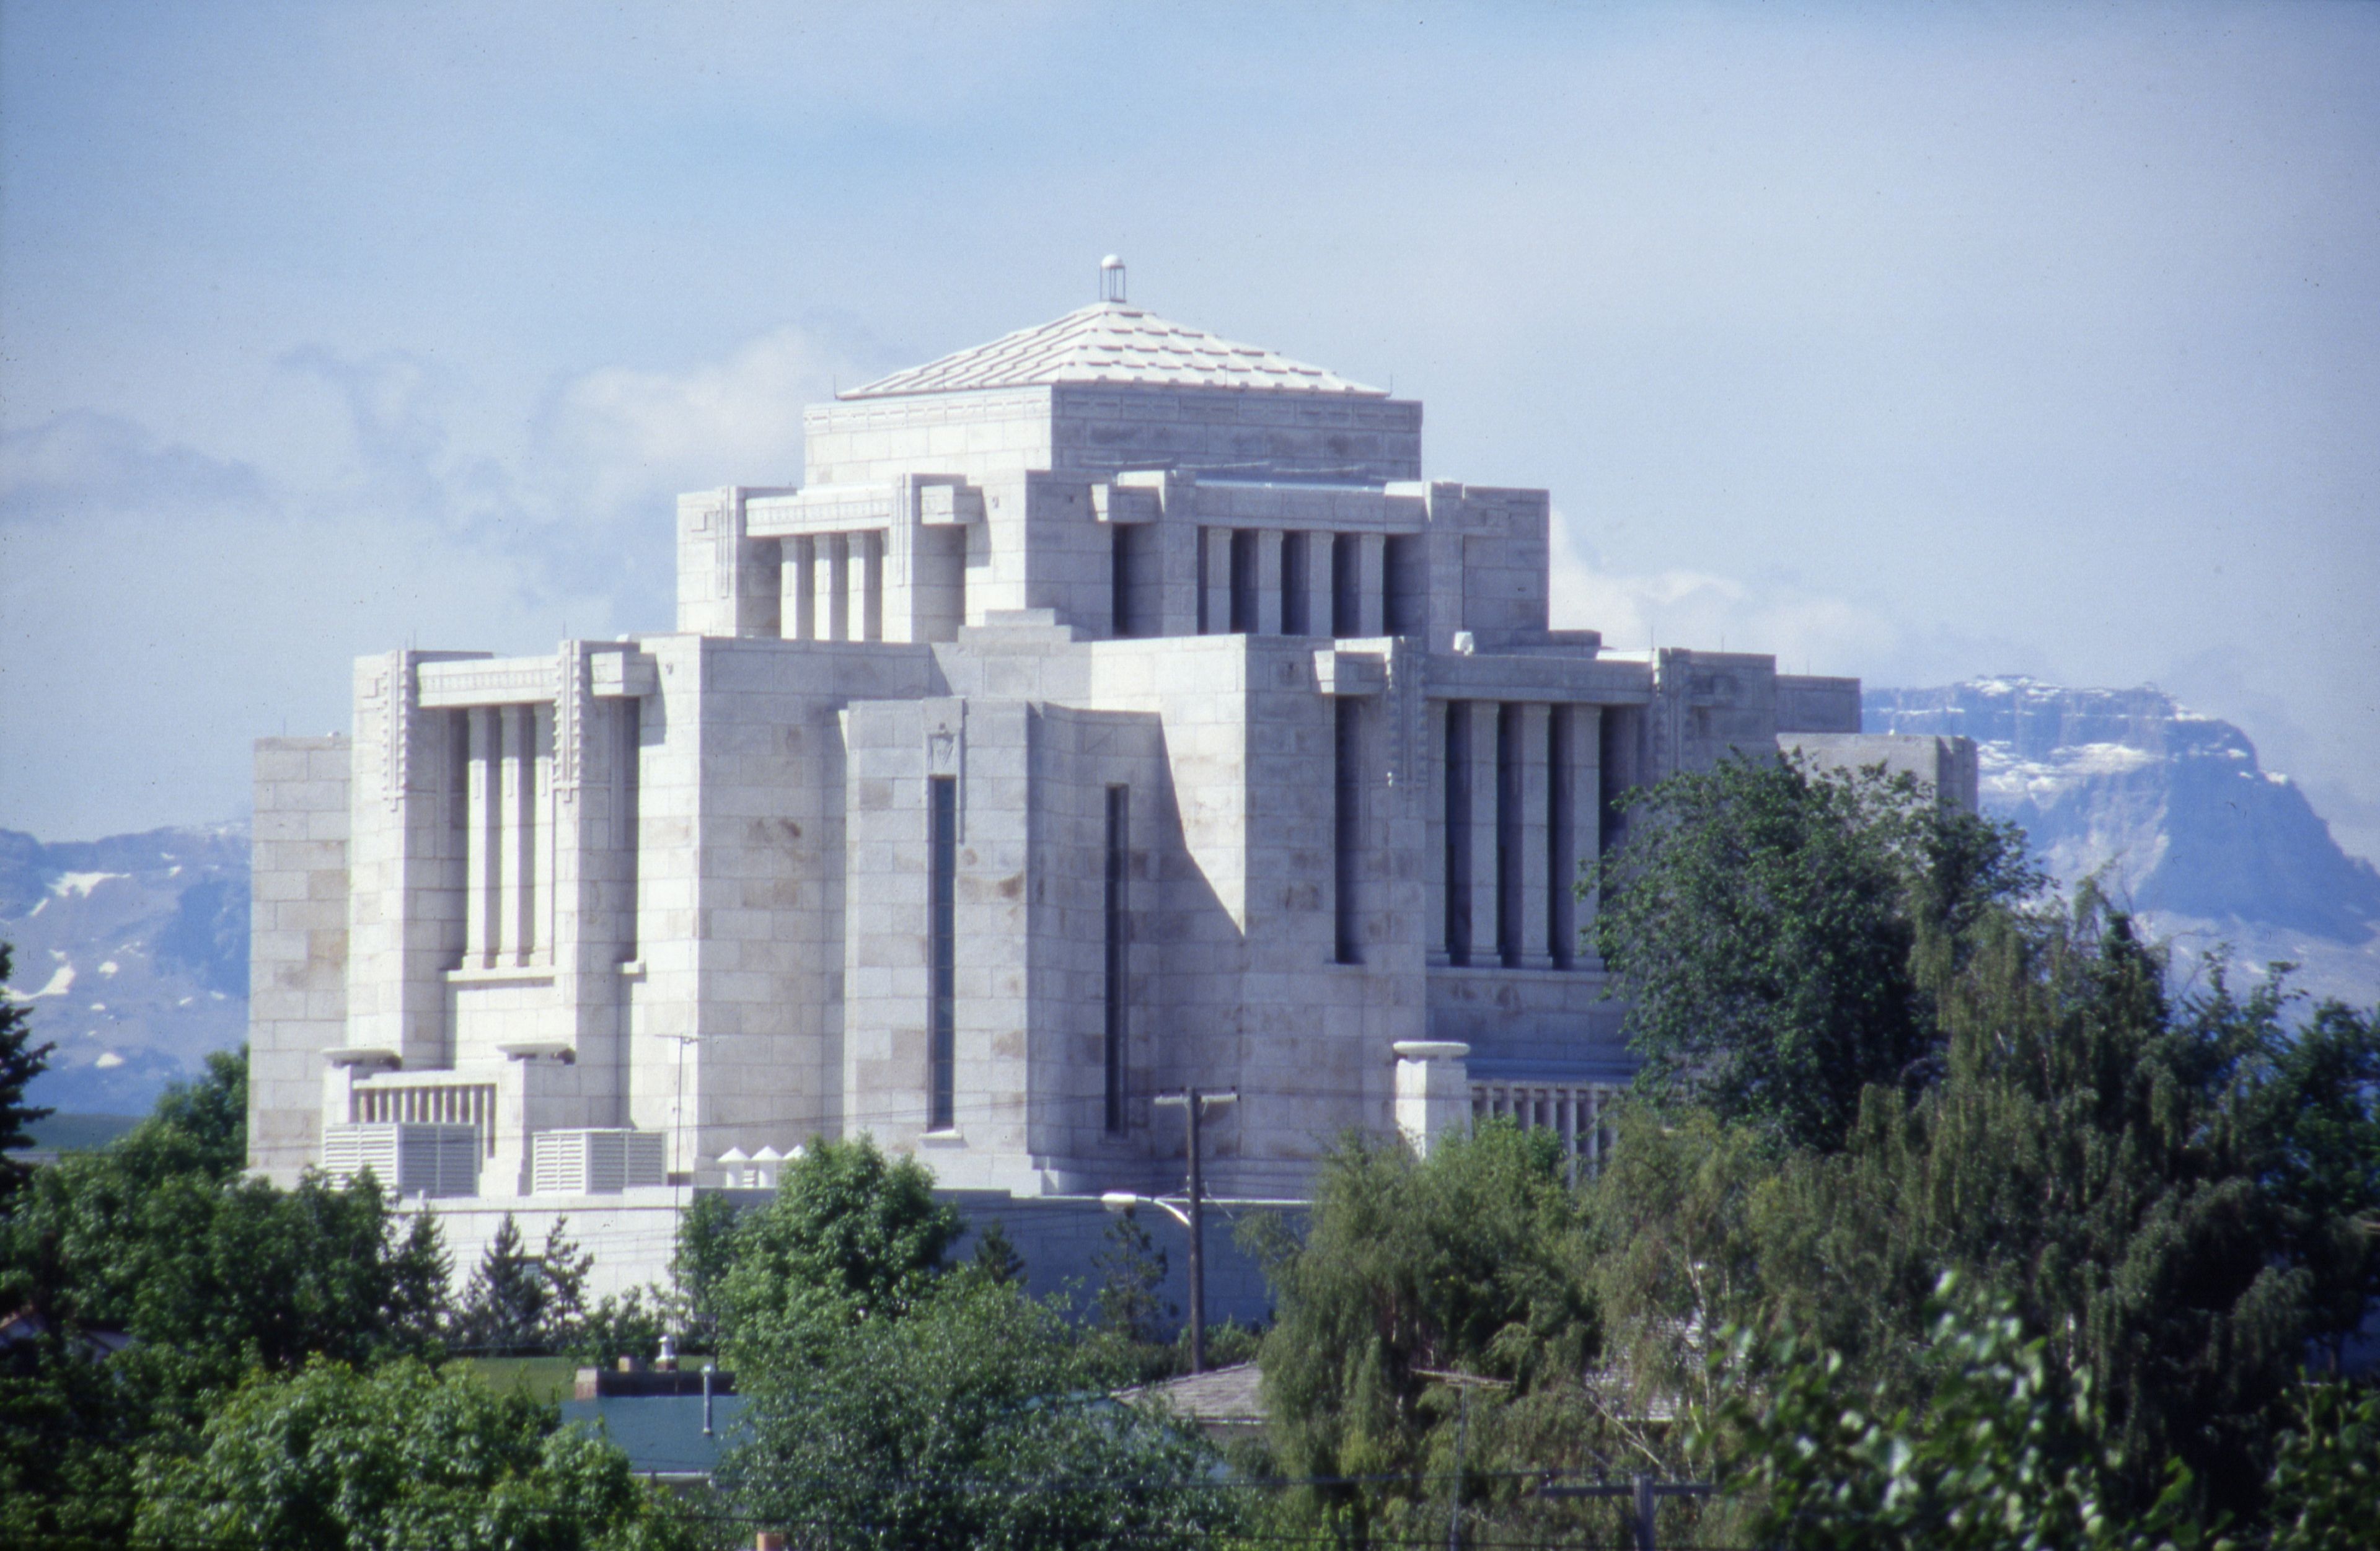 The Cardston Alberta Temple during the daytime.